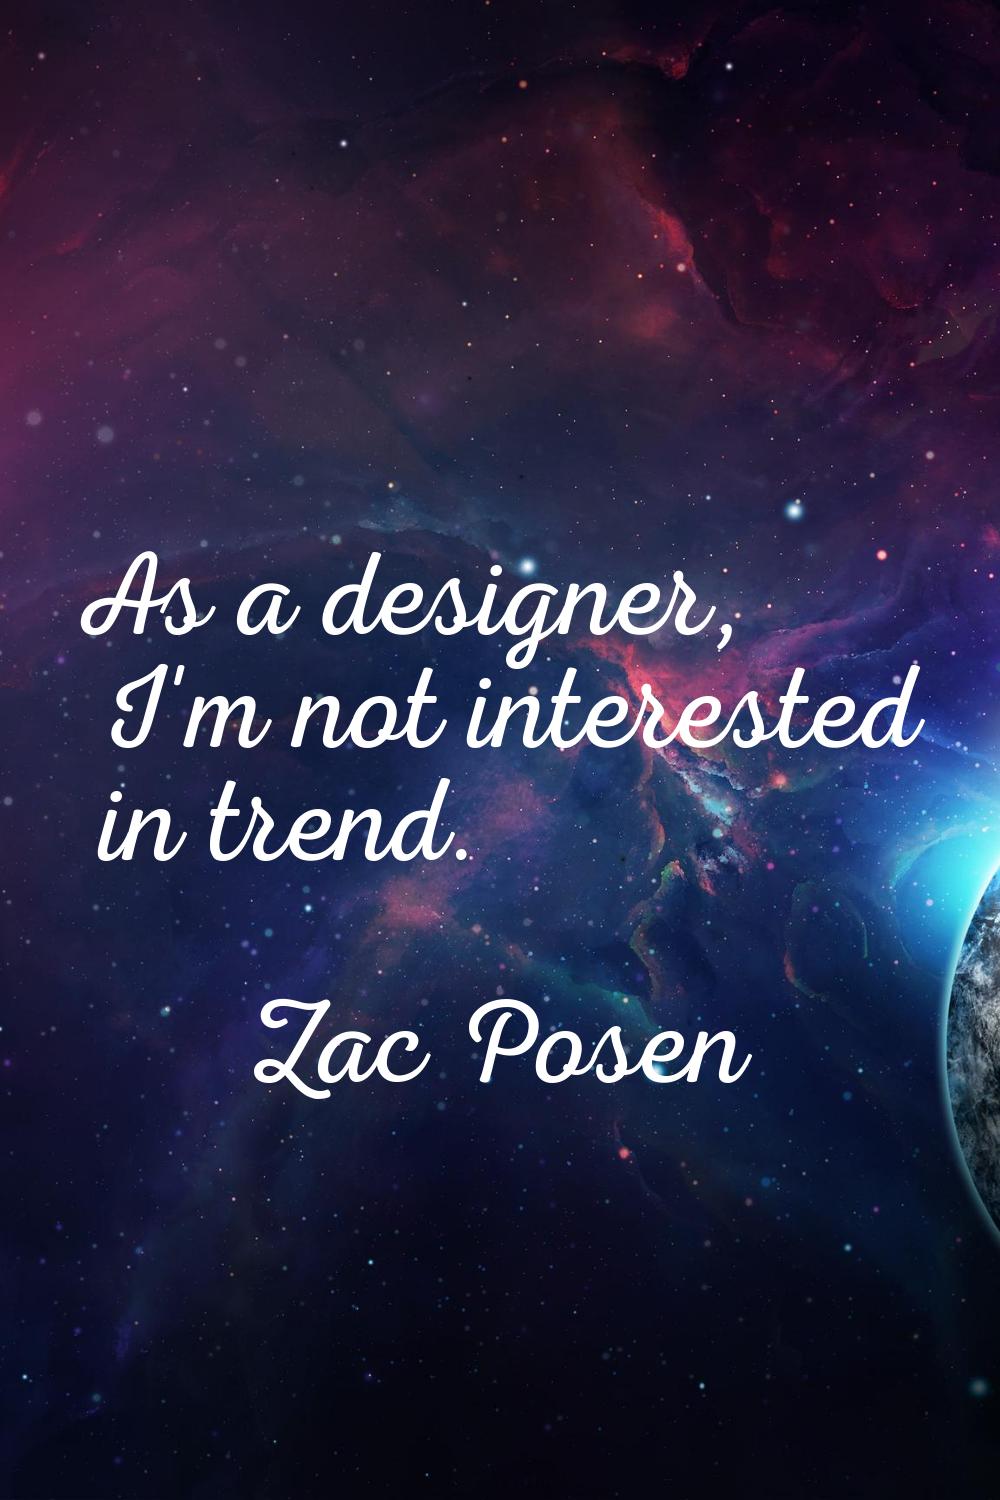 As a designer, I'm not interested in trend.